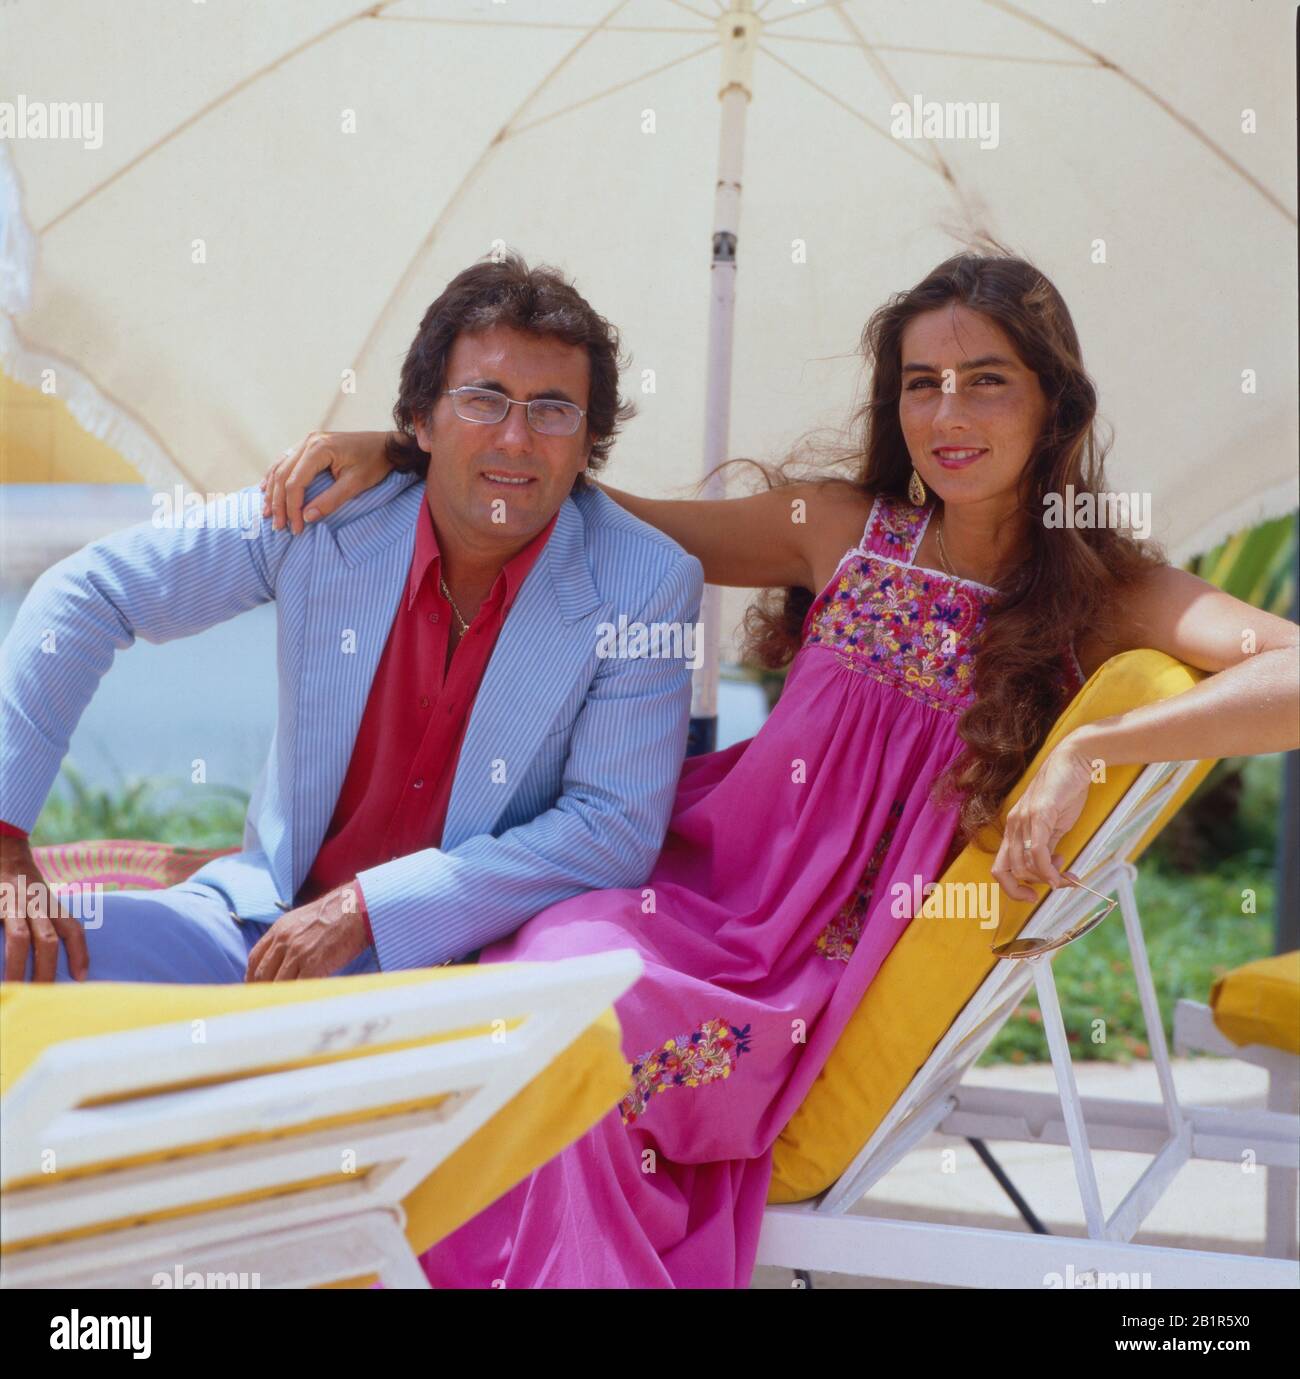 Al bano carrisi and romina power hi-res stock photography and images - Alamy